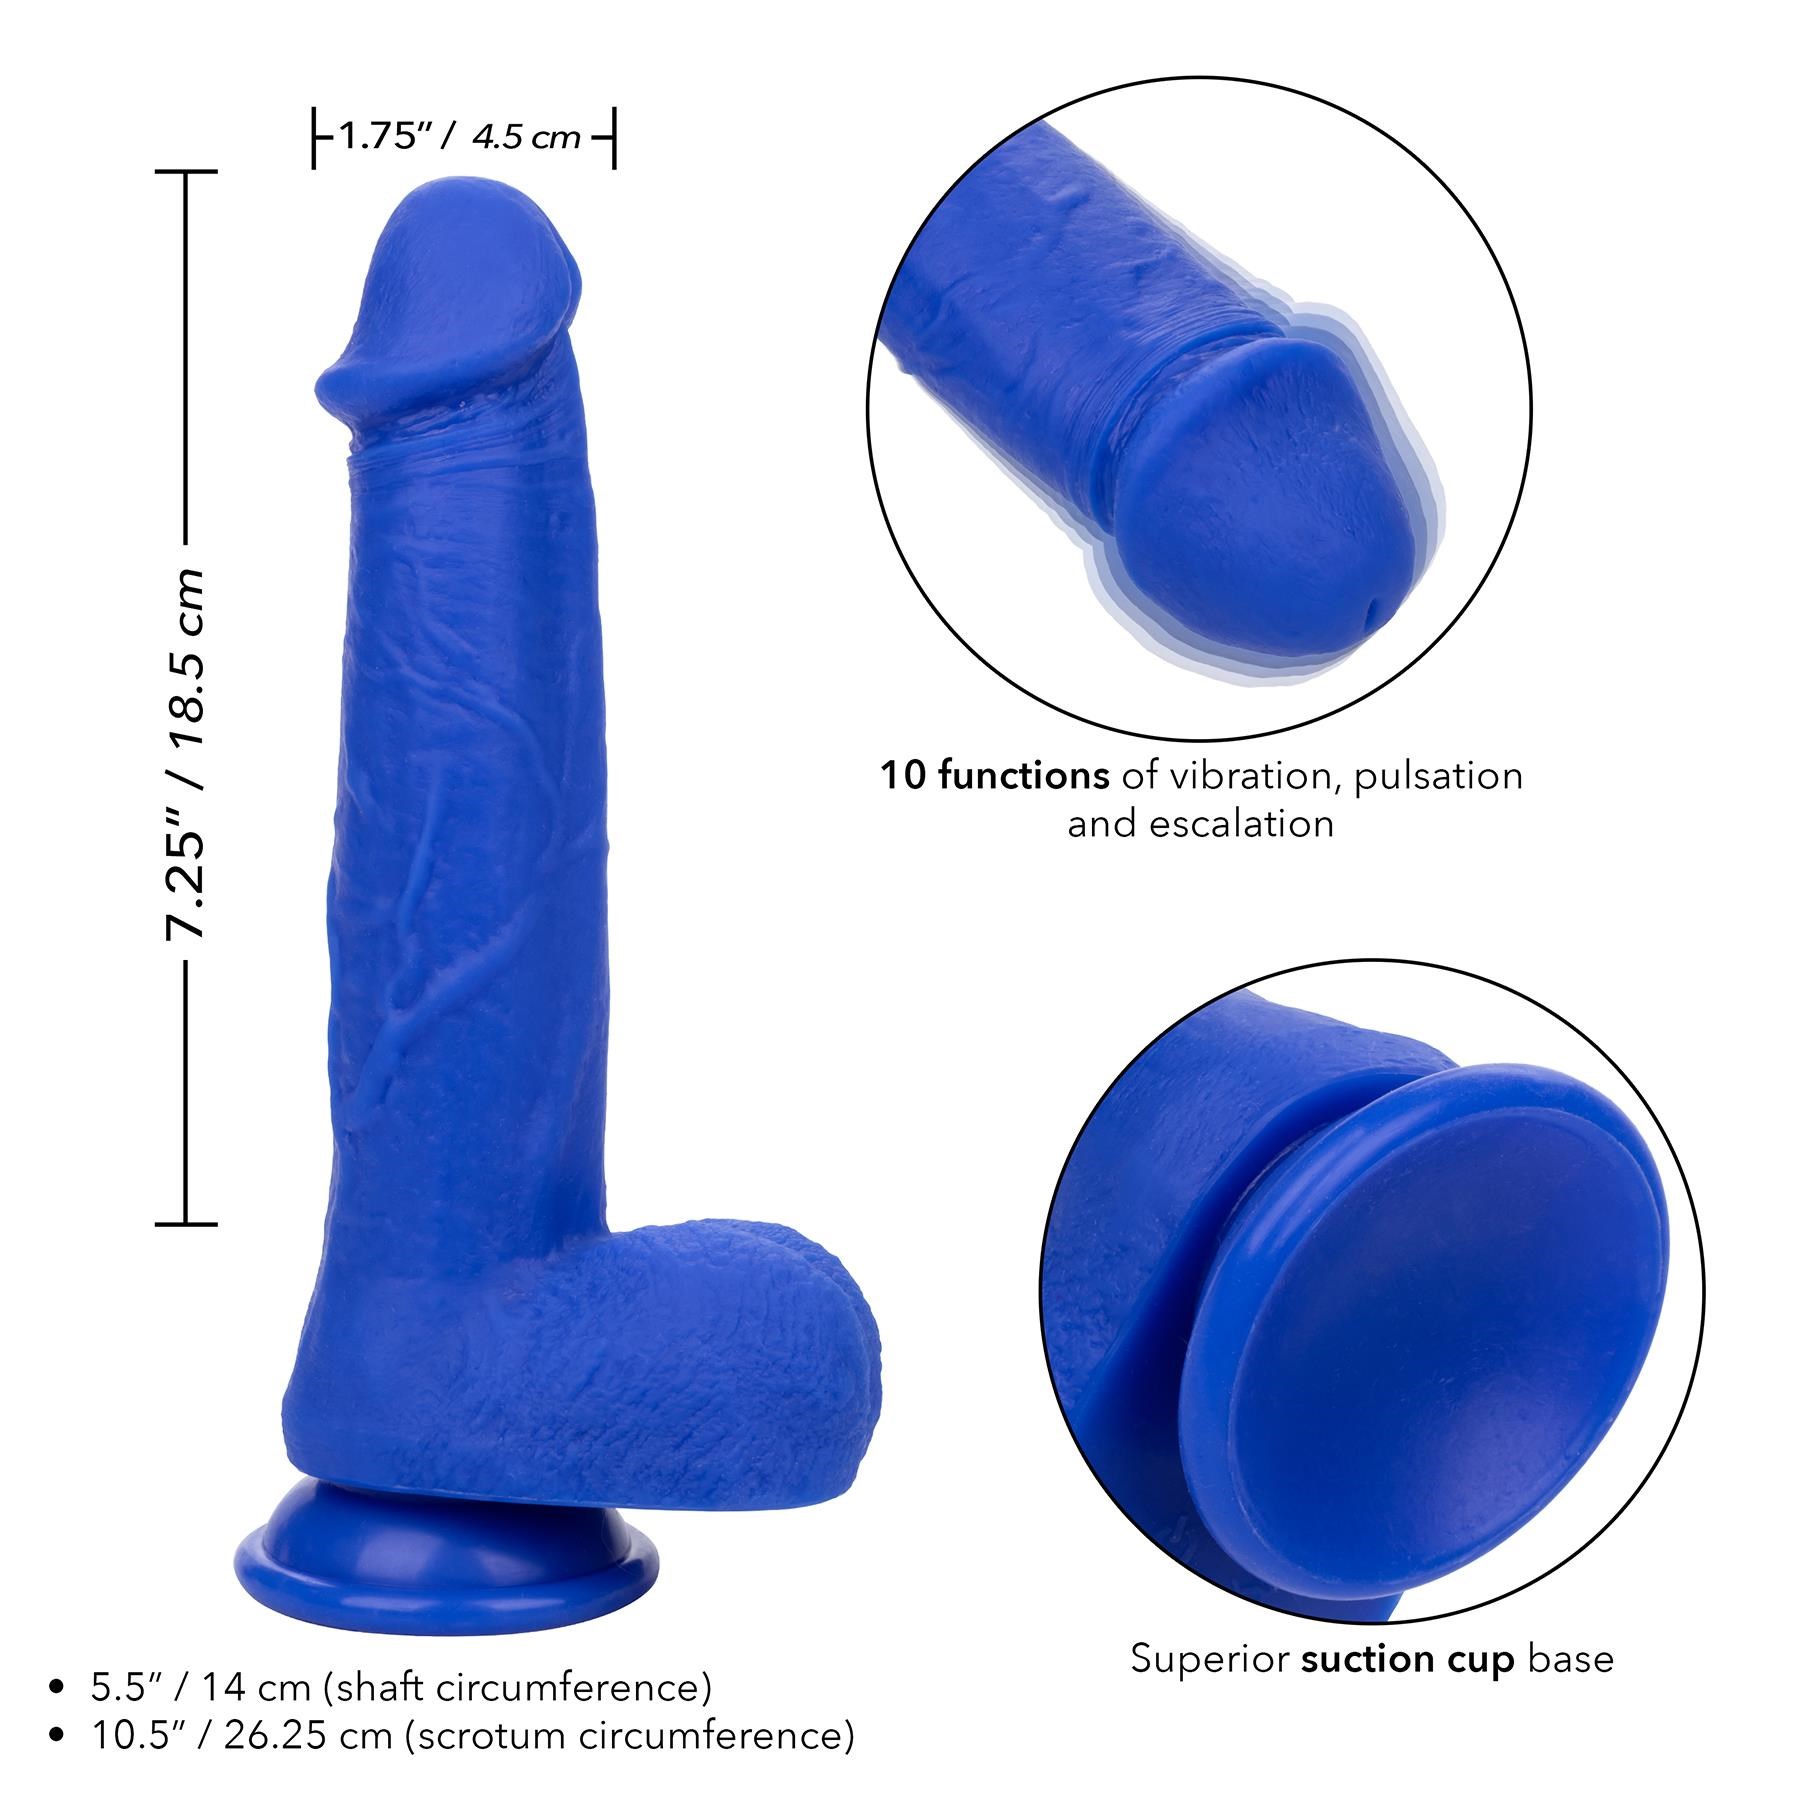 Admiral 8 Inch Vibrating Captain Dildo - Instructions and Dimensions